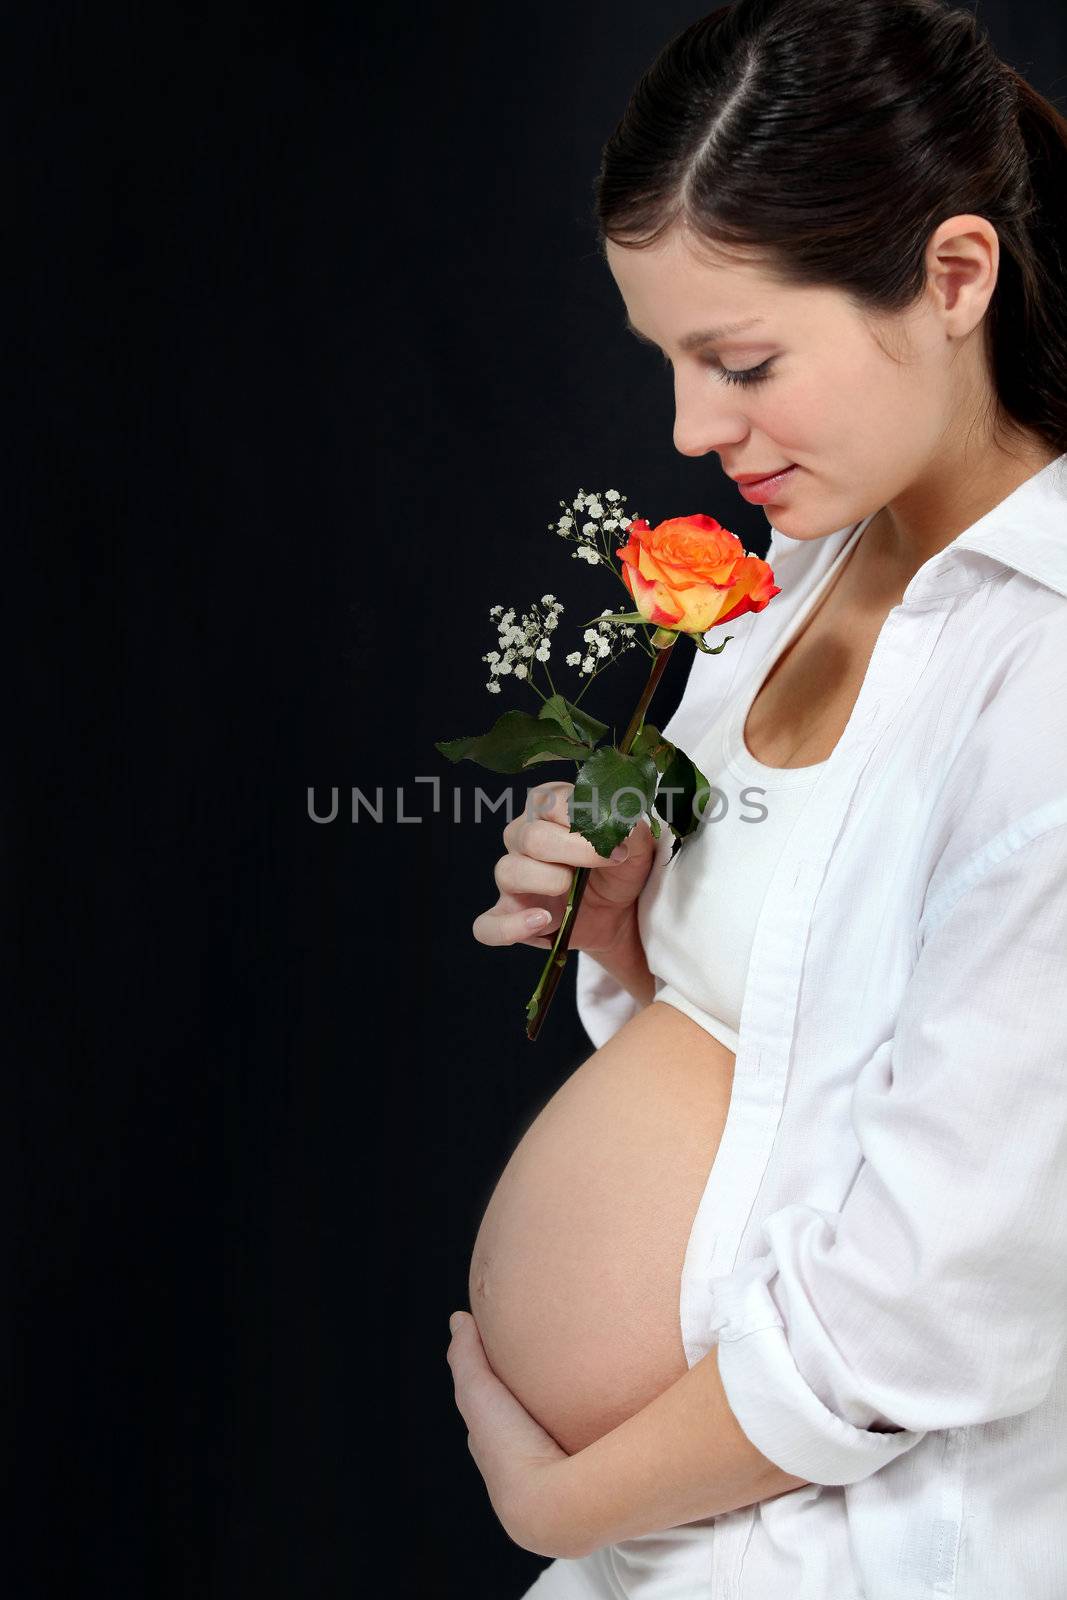 Pregnant woman with a rose